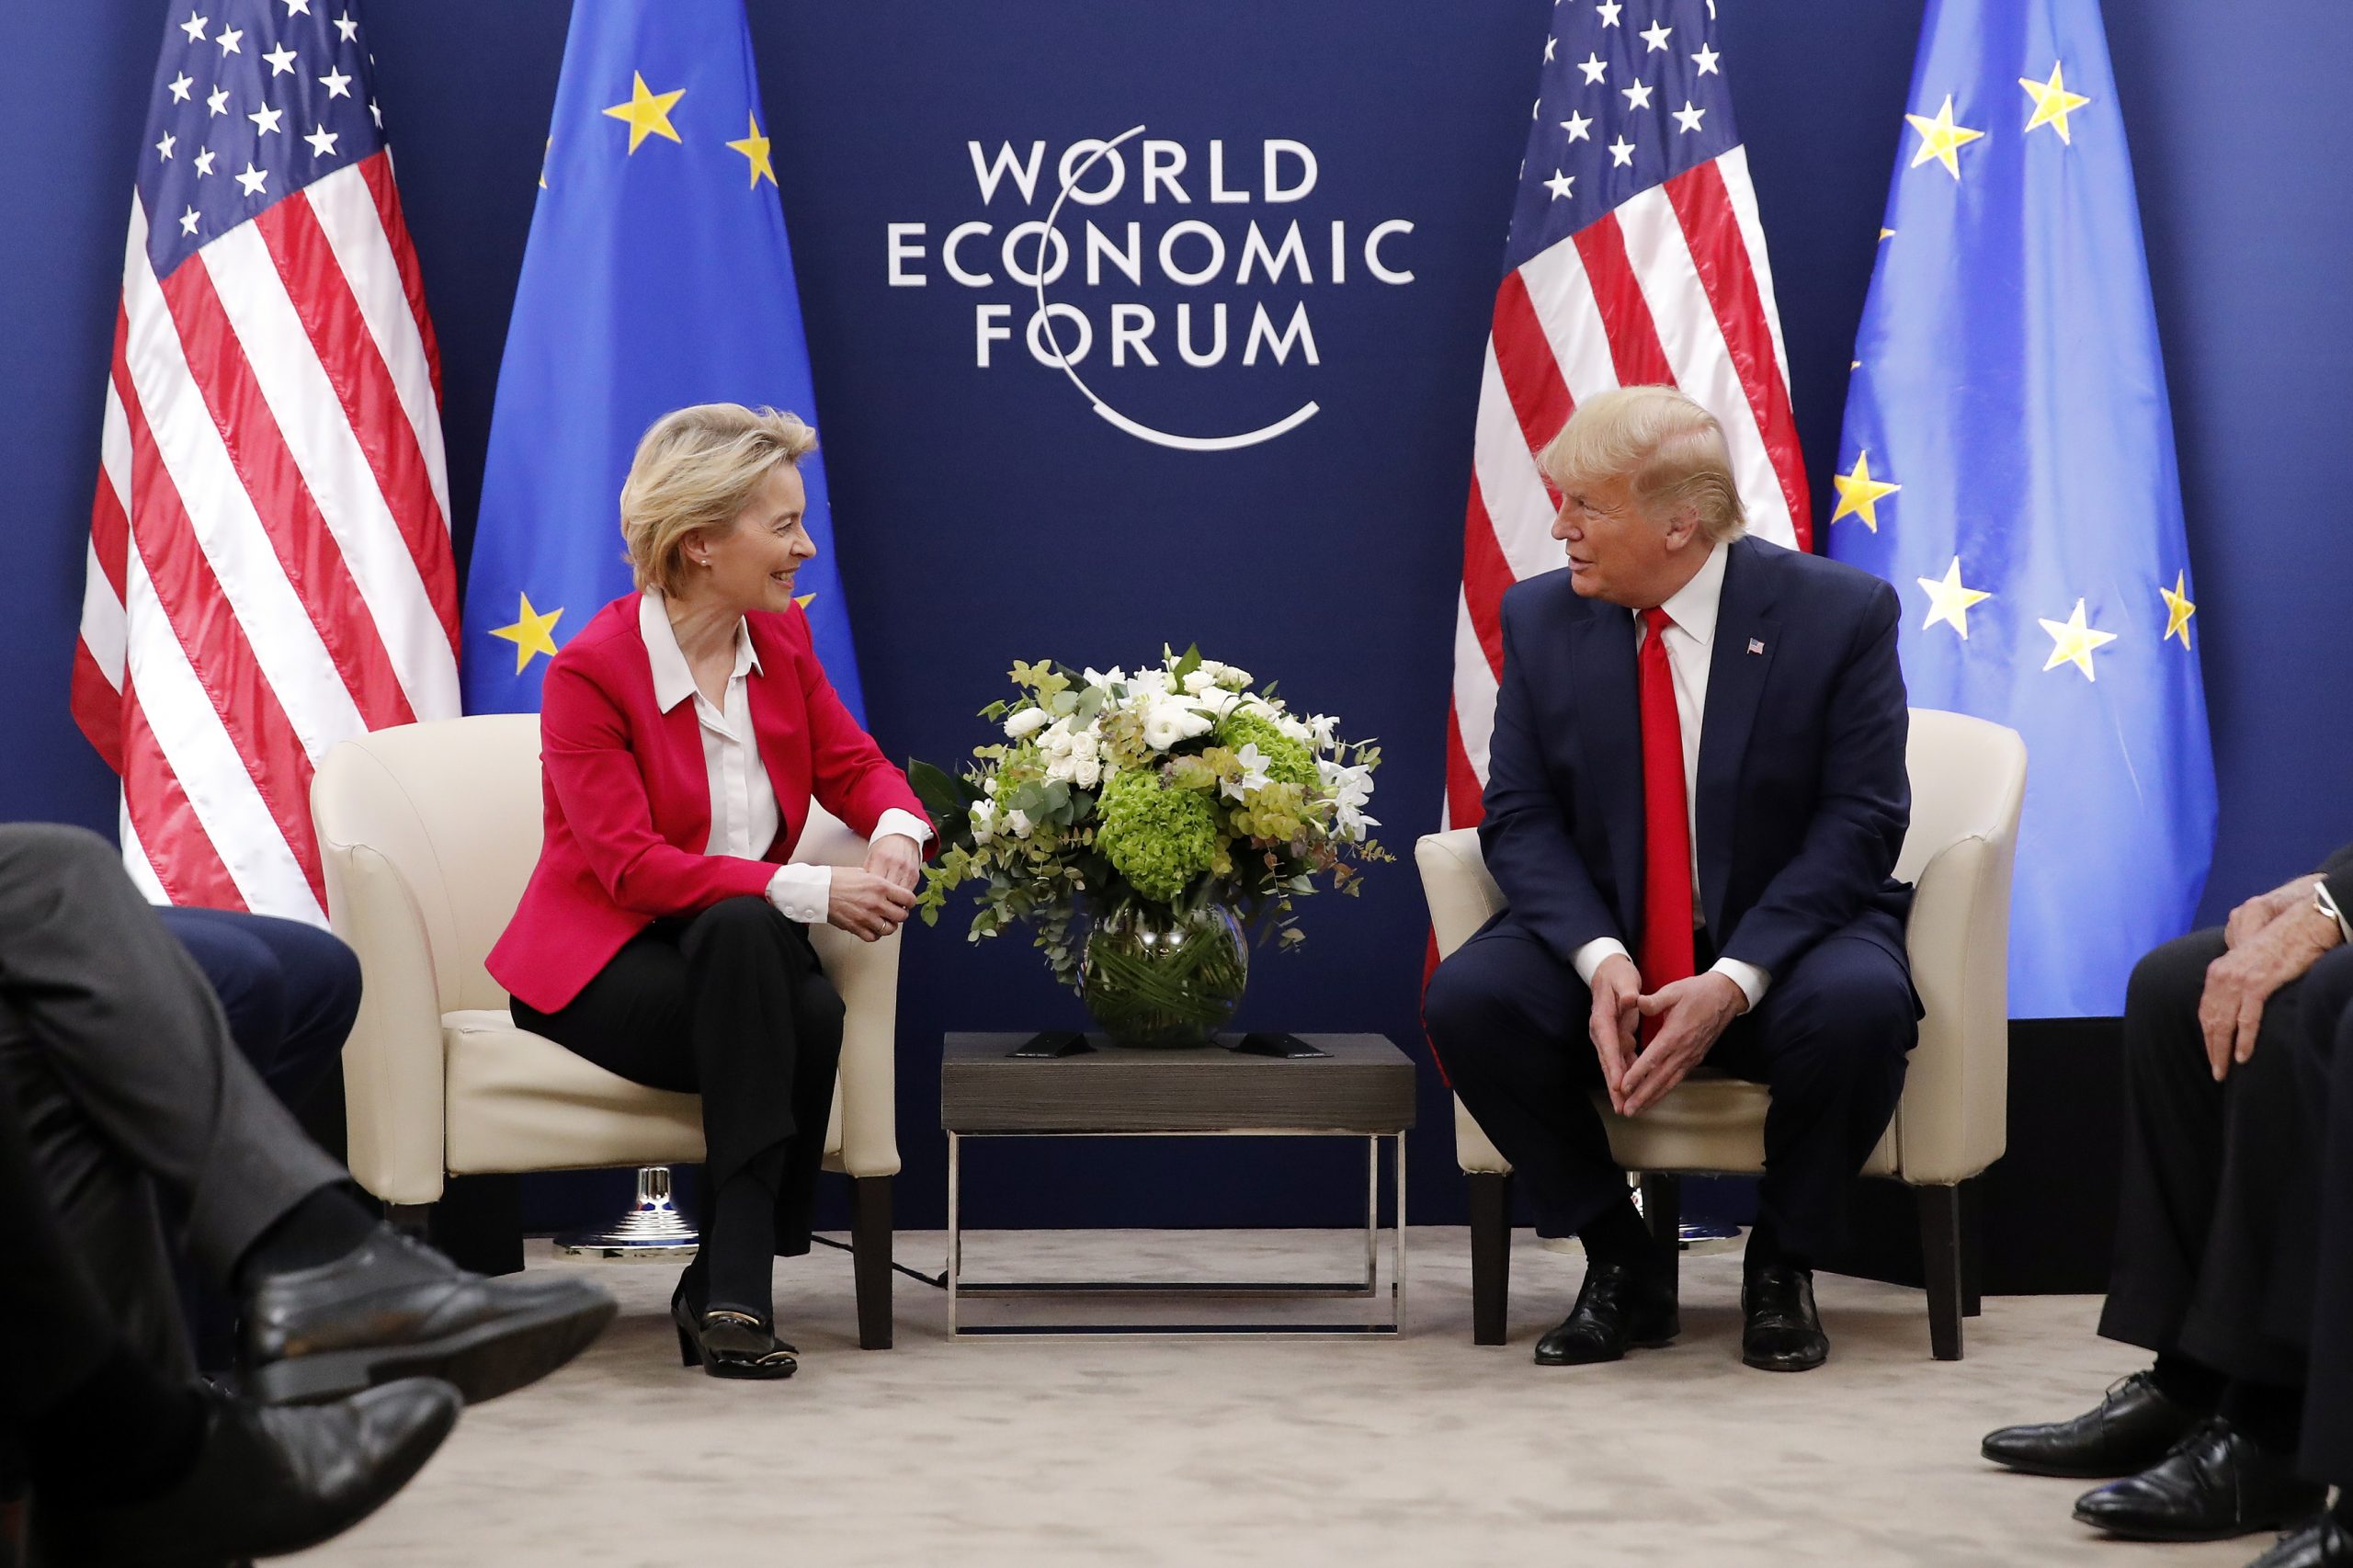 epa08148108 A handout photo made available by the EU Commission shows European Commission President Ursula von der Leyen (L) meeting US President Donald Trump during the annual meeting of the World Economic Forum 2020 in Davos, Switzerland, 21 January 2020. The meeting brings together entrepreneurs, scientists, corporate and political leaders in Davos from January 21 to 24.  EPA/STEFAN WERMUTH HANDOUT  HANDOUT EDITORIAL USE ONLY/NO SALES